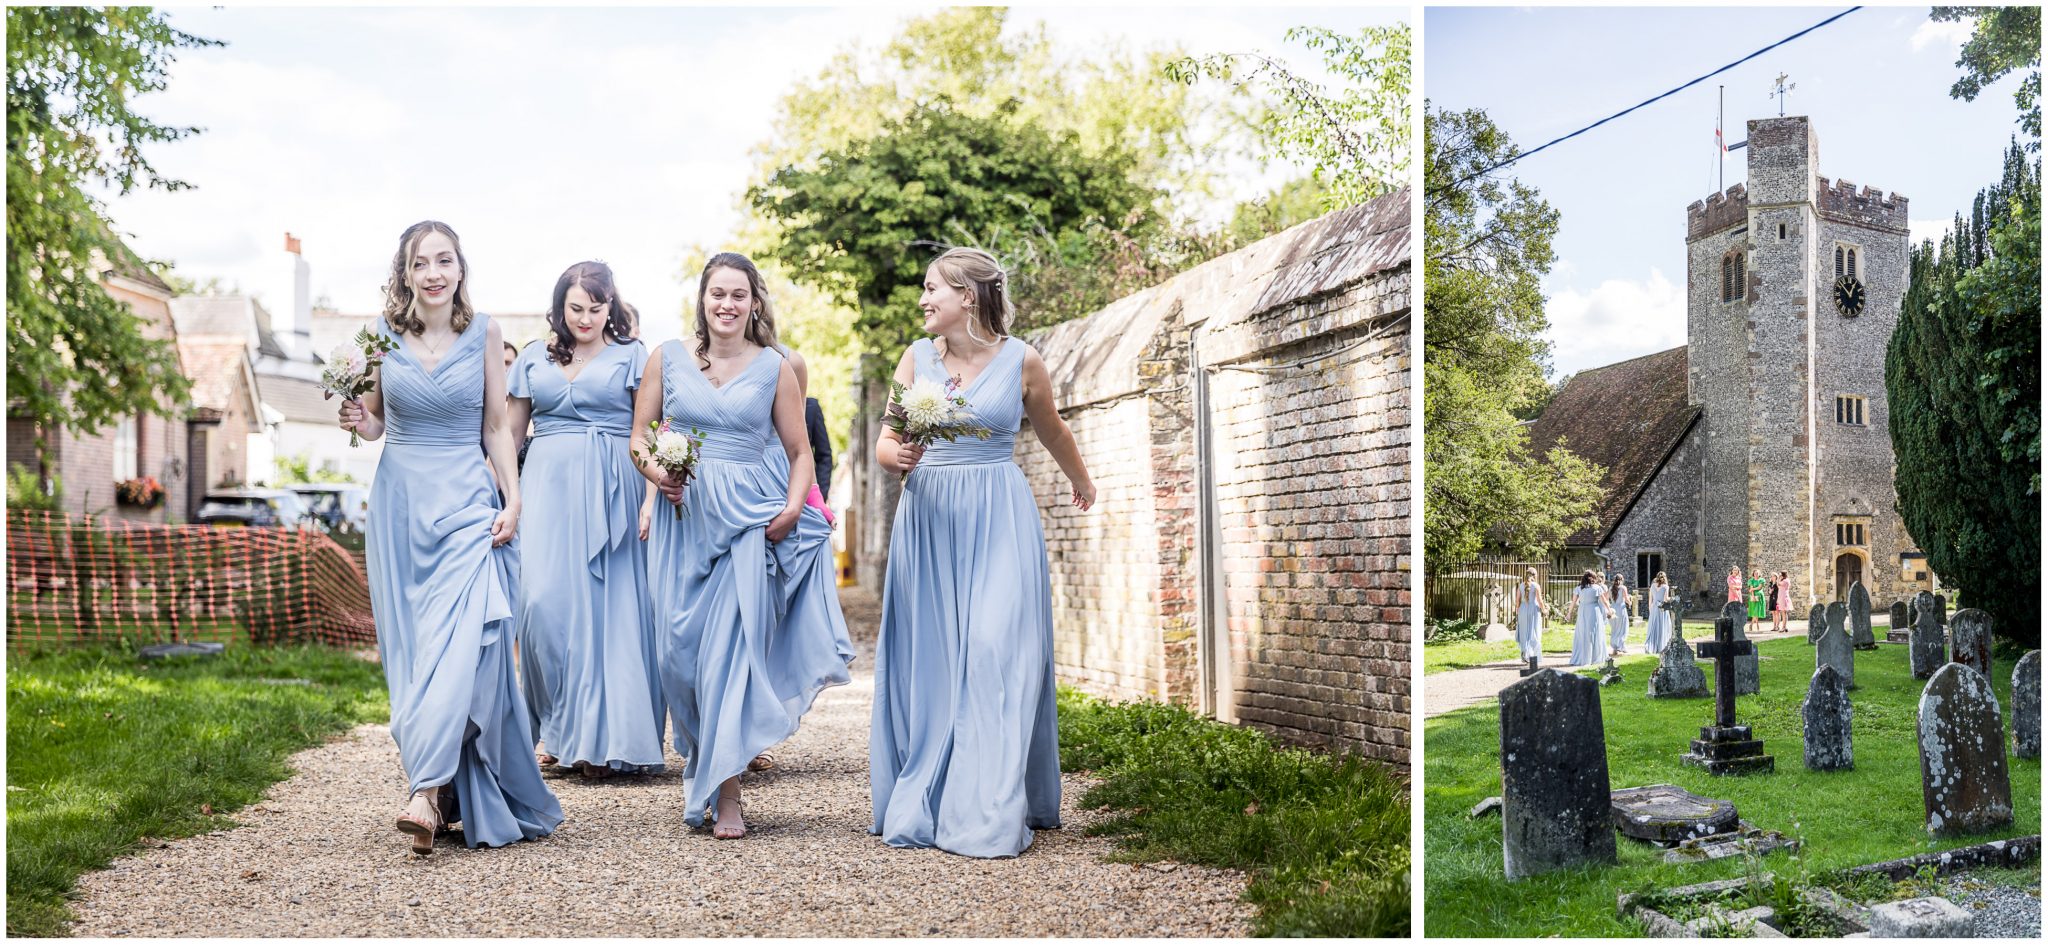 The bridesmaids arrive at Droxford church in Hampshire on a sunny Summer's day